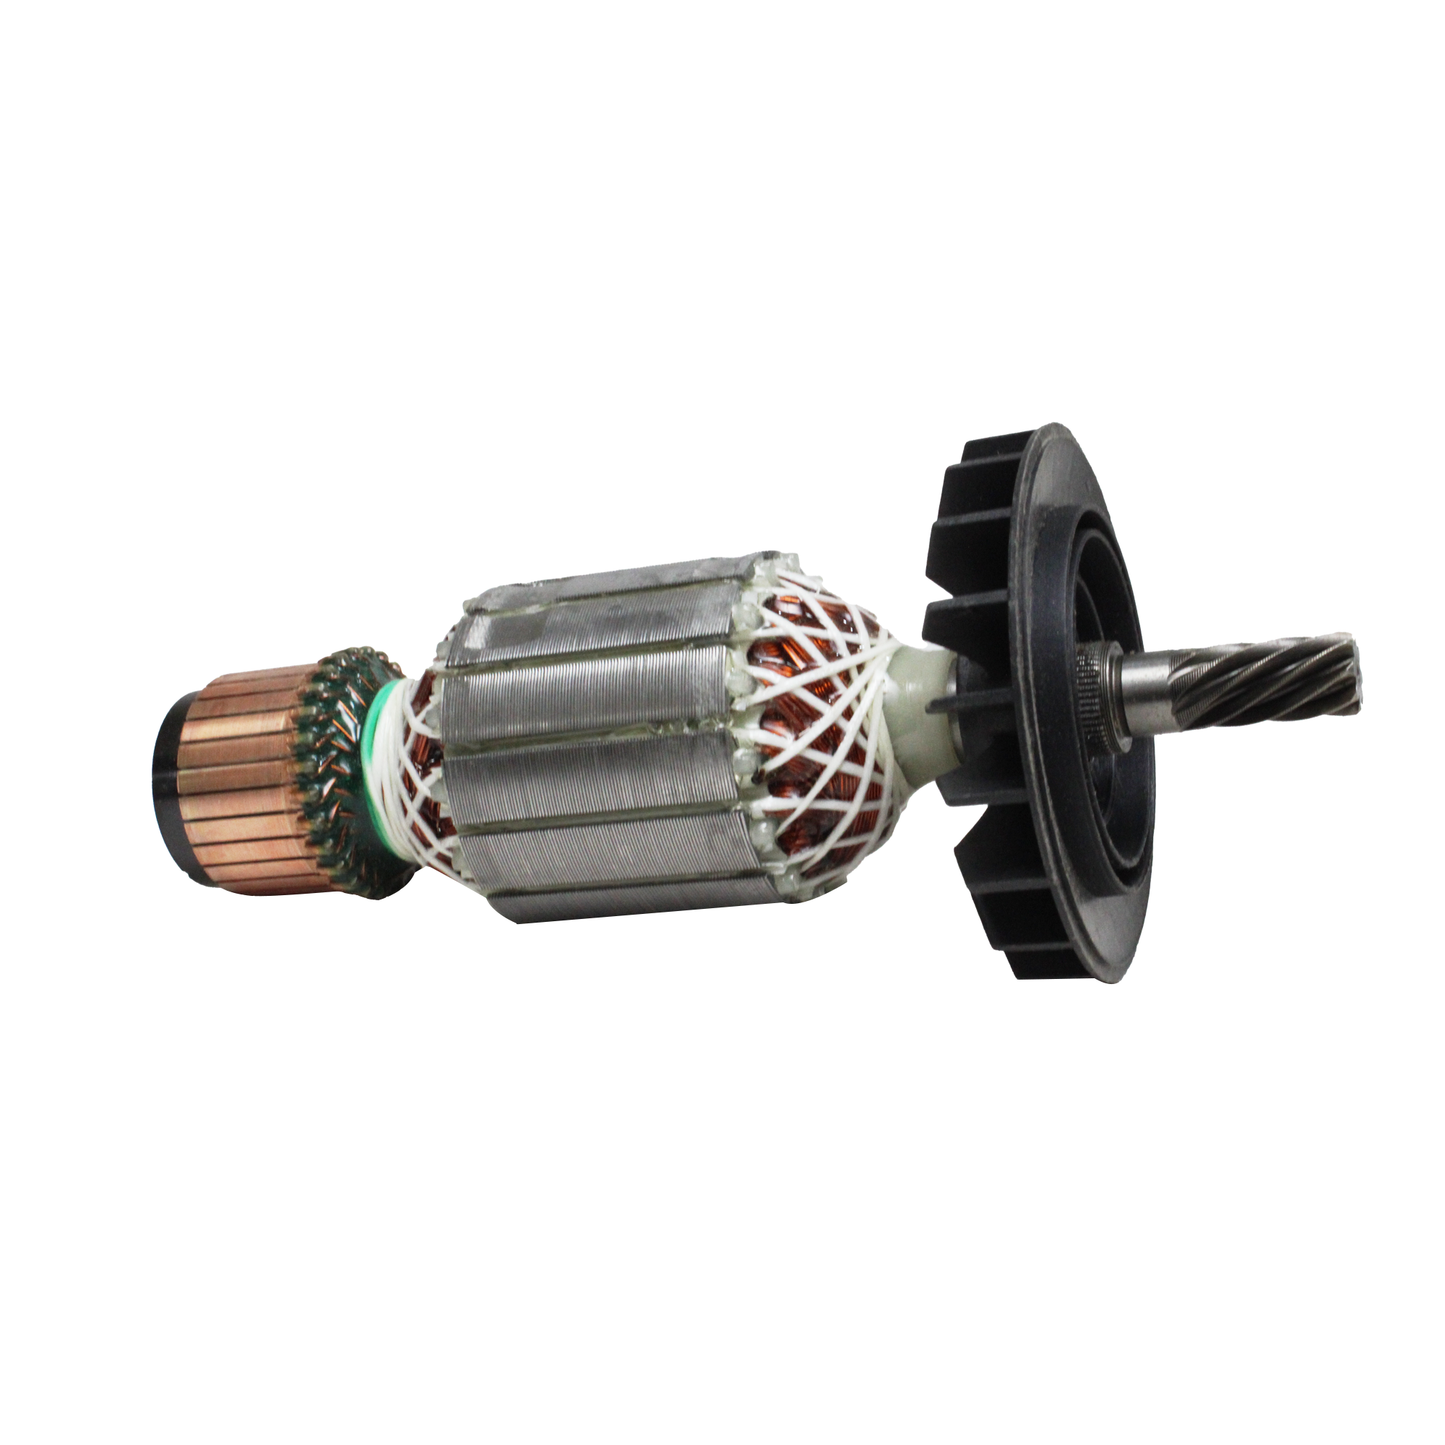 AEGON ACWFGC02000 Copper Armature - Compatible with Bosch GCO2000 Chopsaw and Similar Models of Other Brands